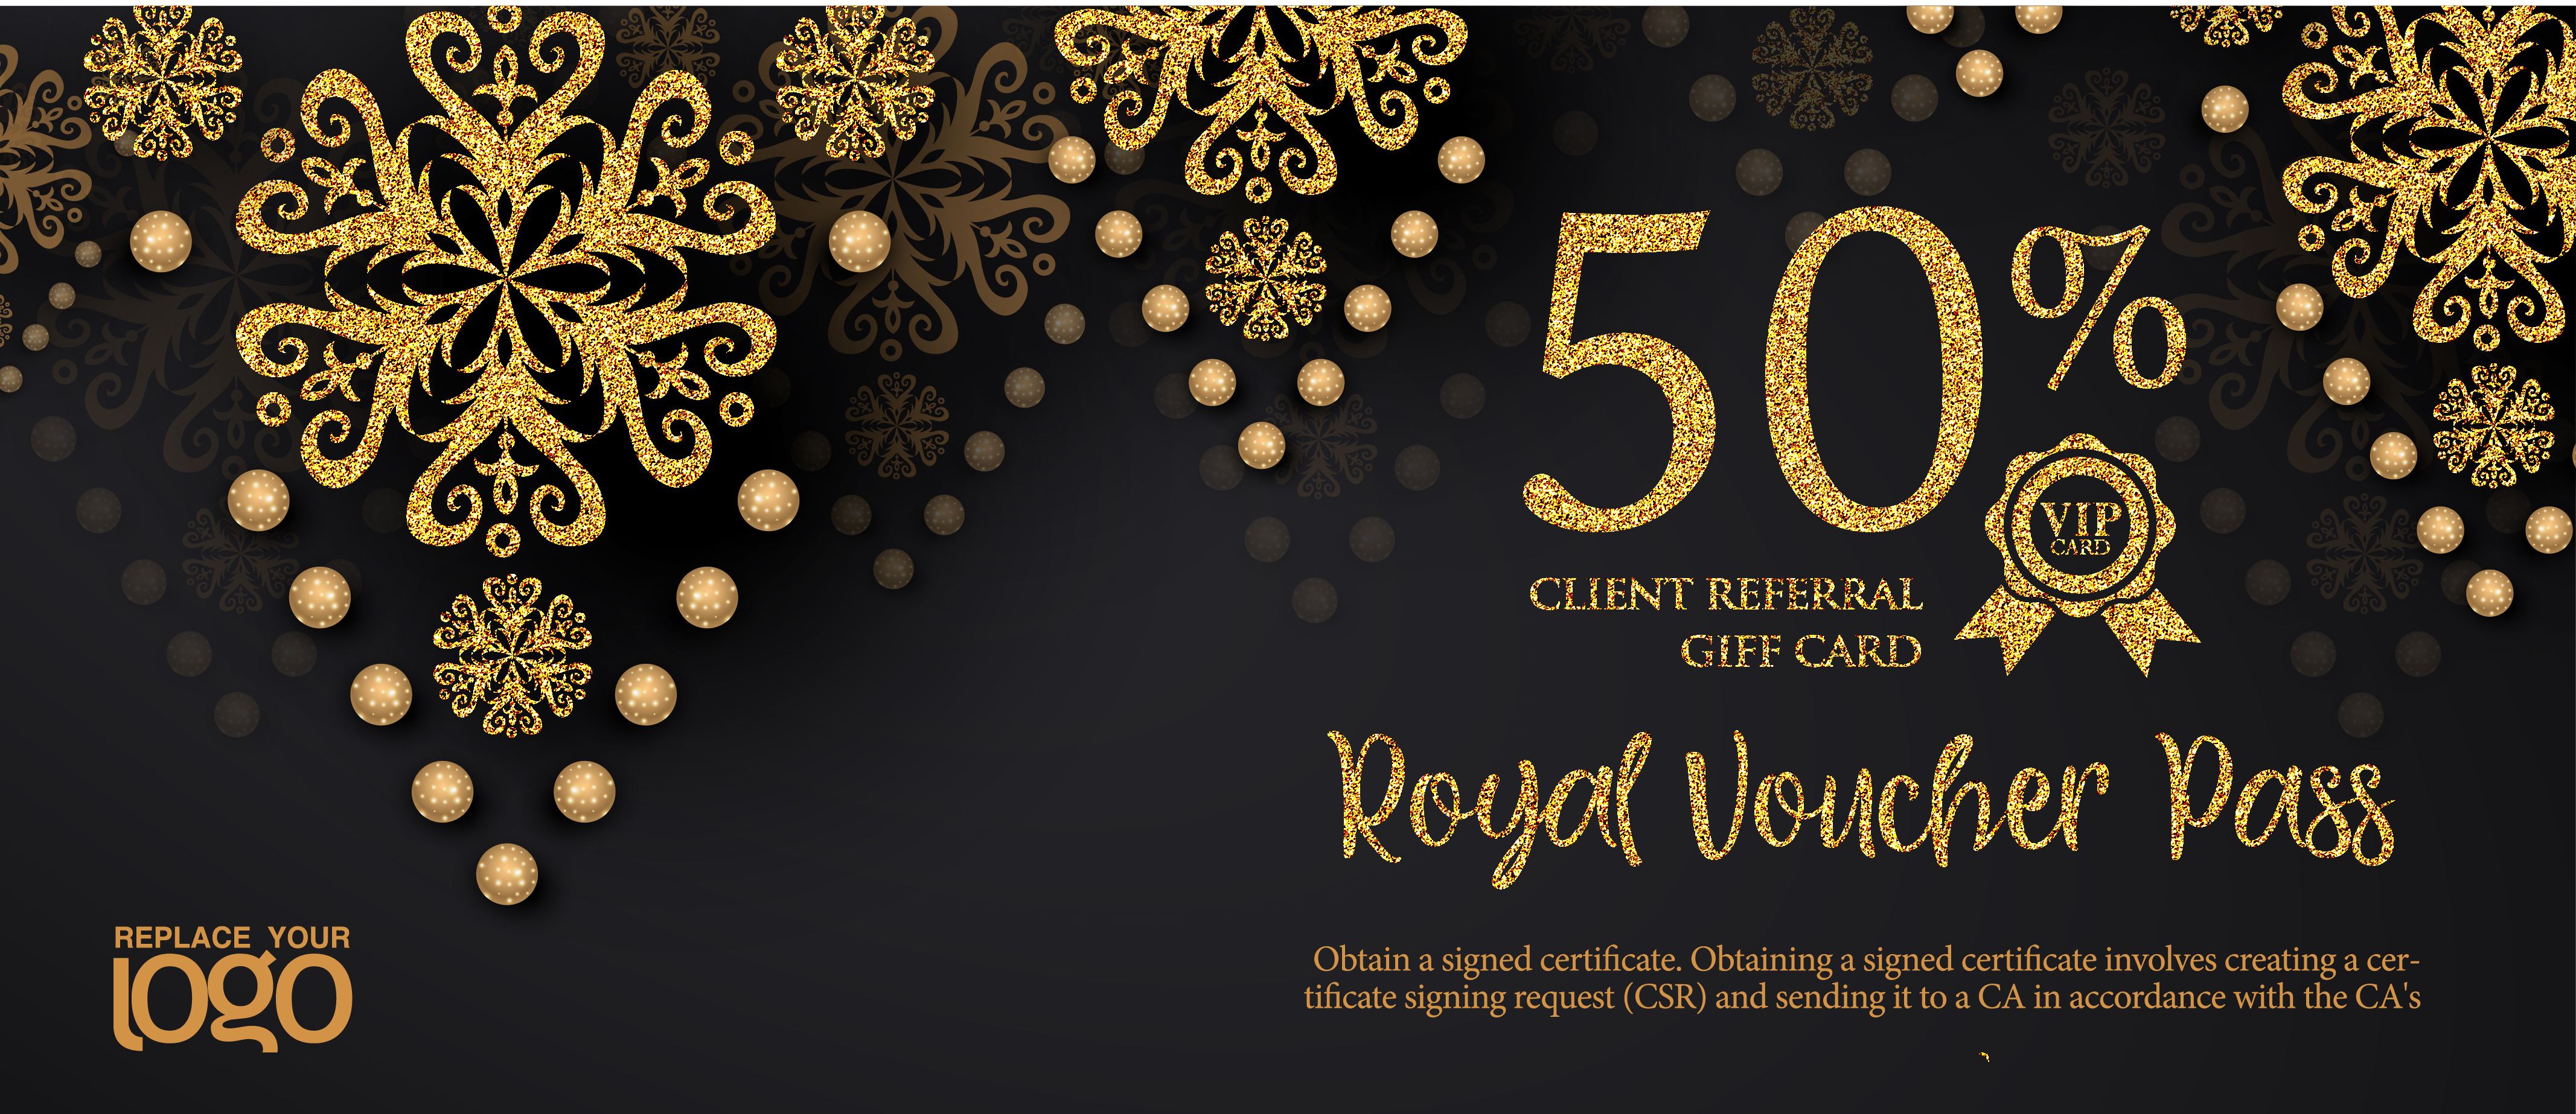 Gold And Black Gift Voucher Discount Coupon Banner Download Free Vectors Clipart Graphics Vector Art